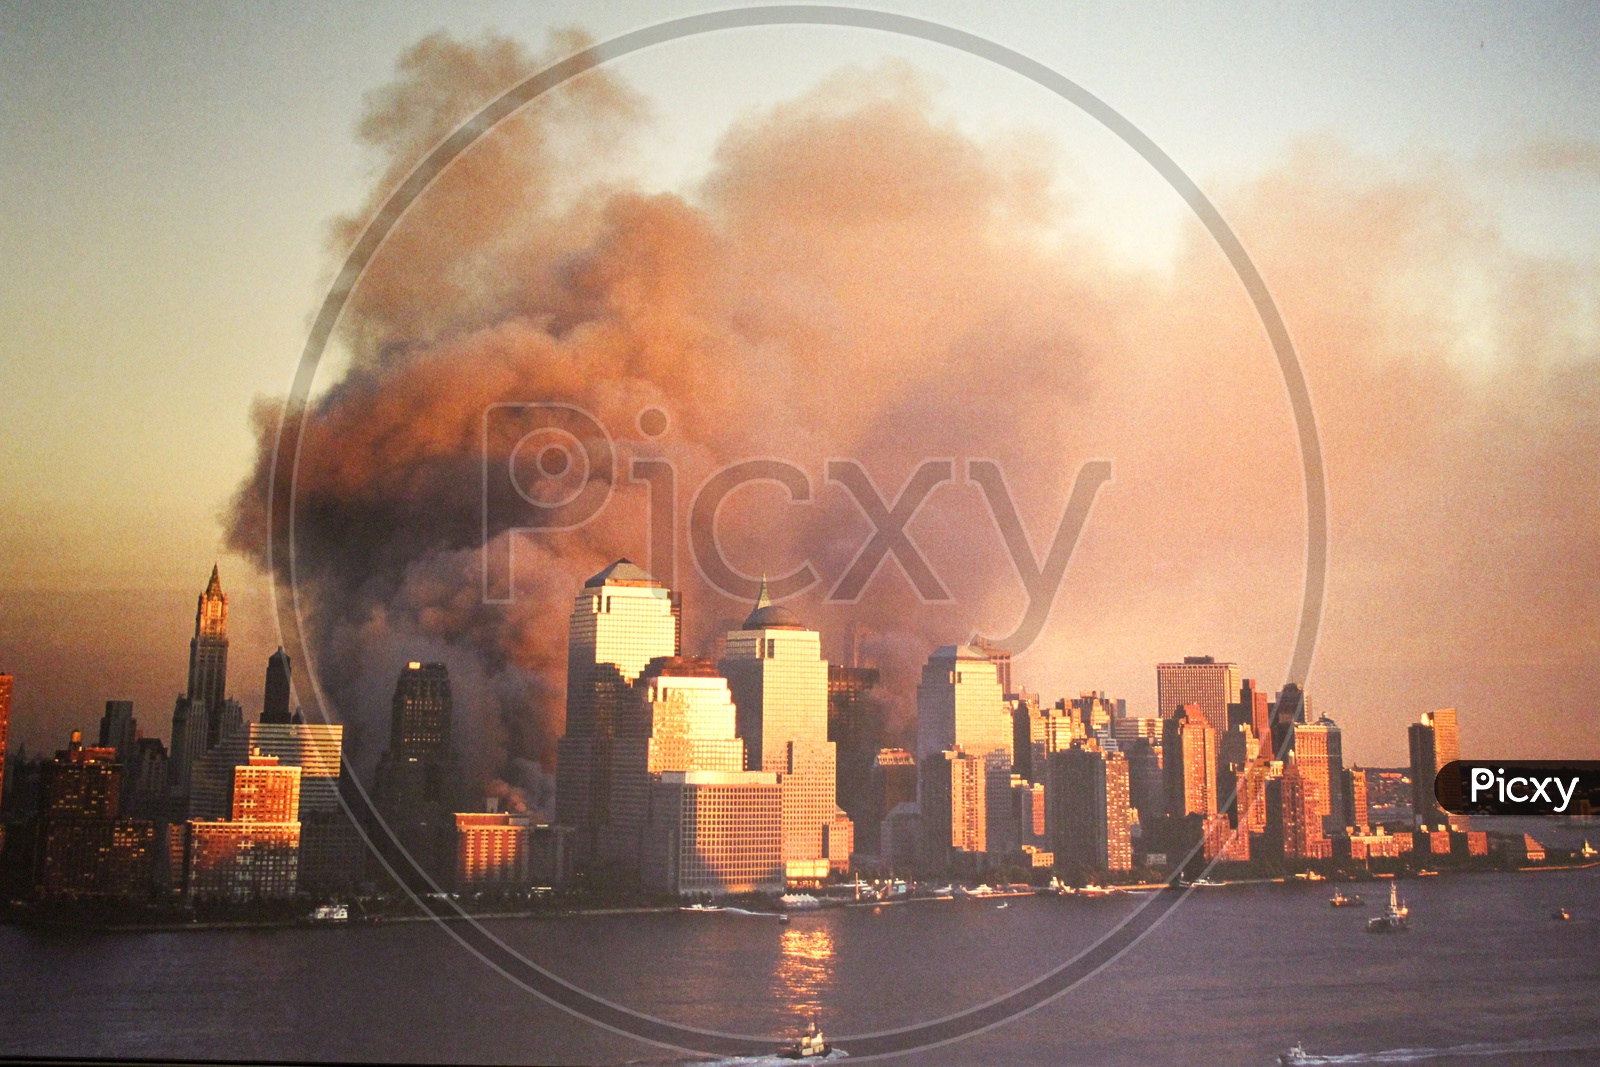 Collapsing of World Trade Center Twin Towers during the attack on 9/11.